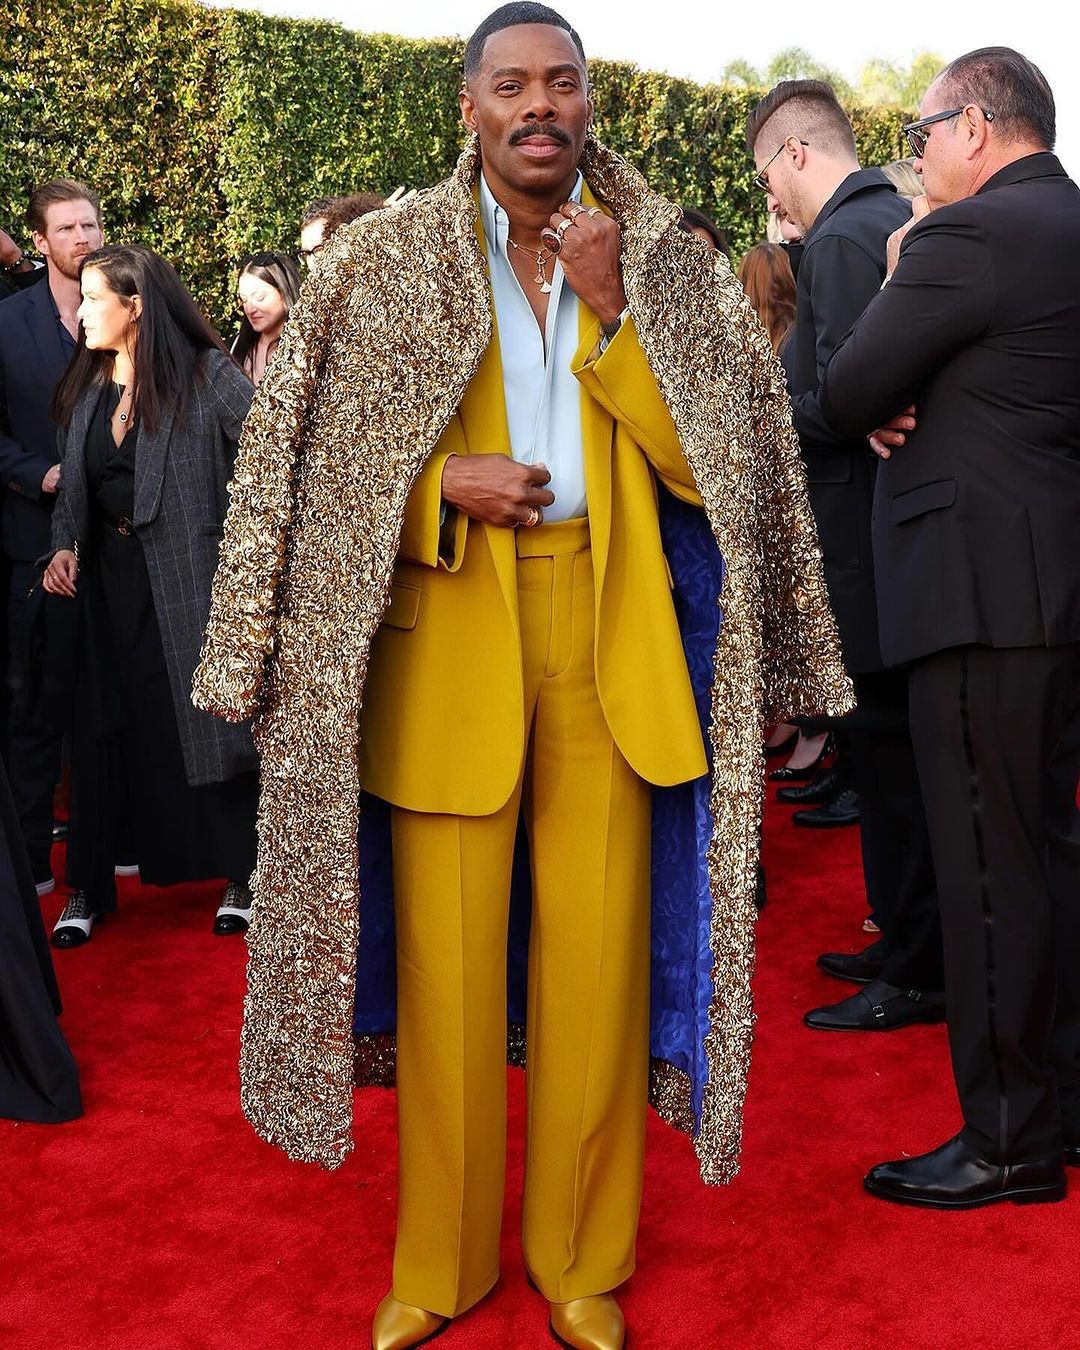 Colman Domingo wore a light blue Valentino shirt which he layered with a mustard yellow blazer and pants, and completed the look with a pair of Louboutin gold shoes. He also wore jewels from Bulgari, adding some shine and sophistication to his outfit.